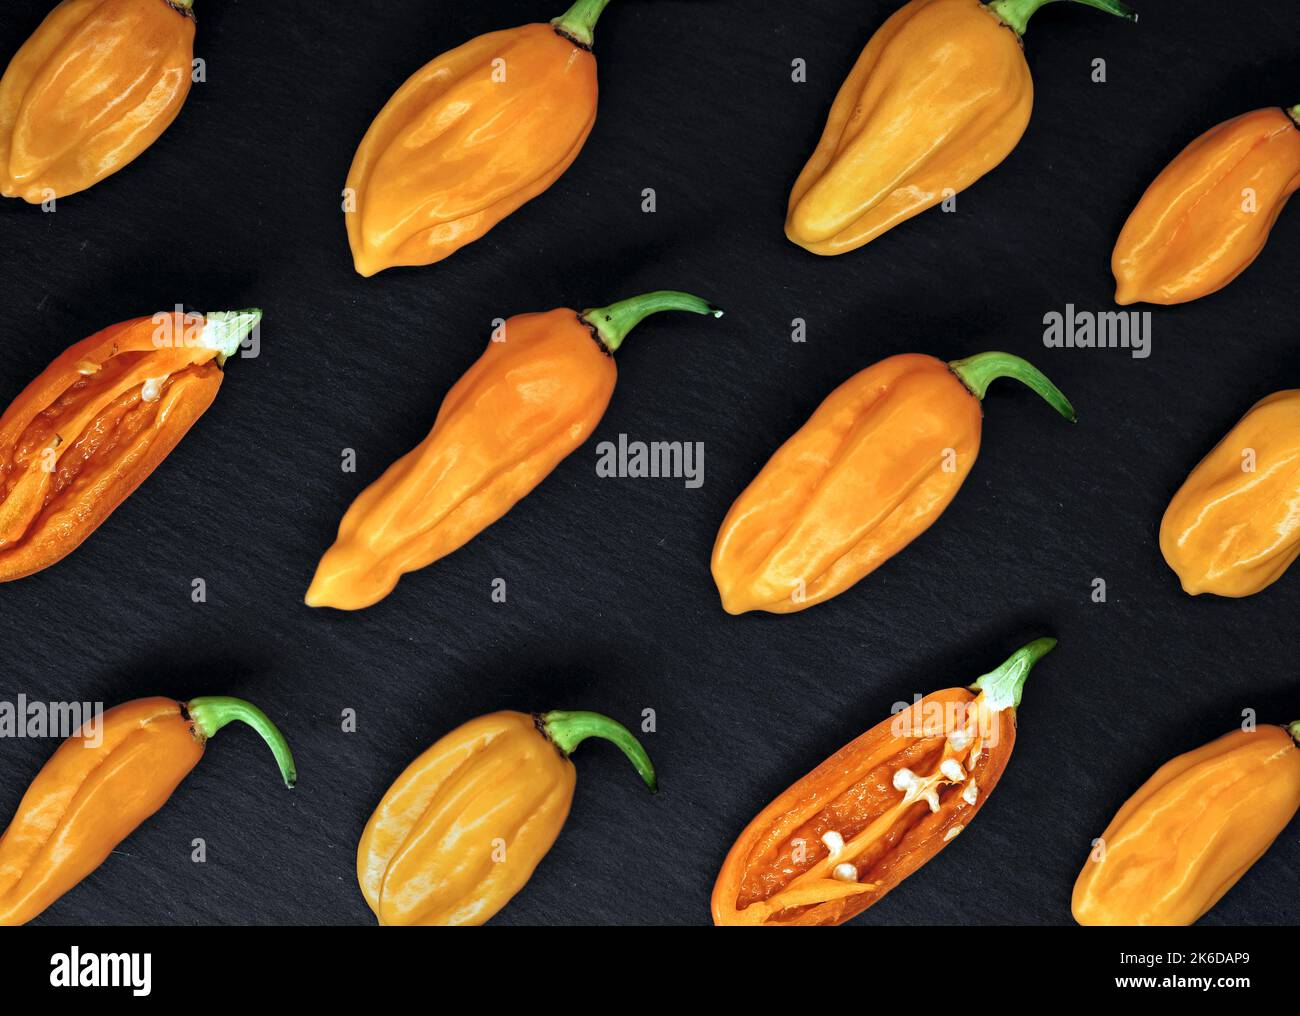 top view of hot orange chili peppers, bhut jolokia, on black slate background, diagonal arrangement of the hottest chillies in the world Stock Photo